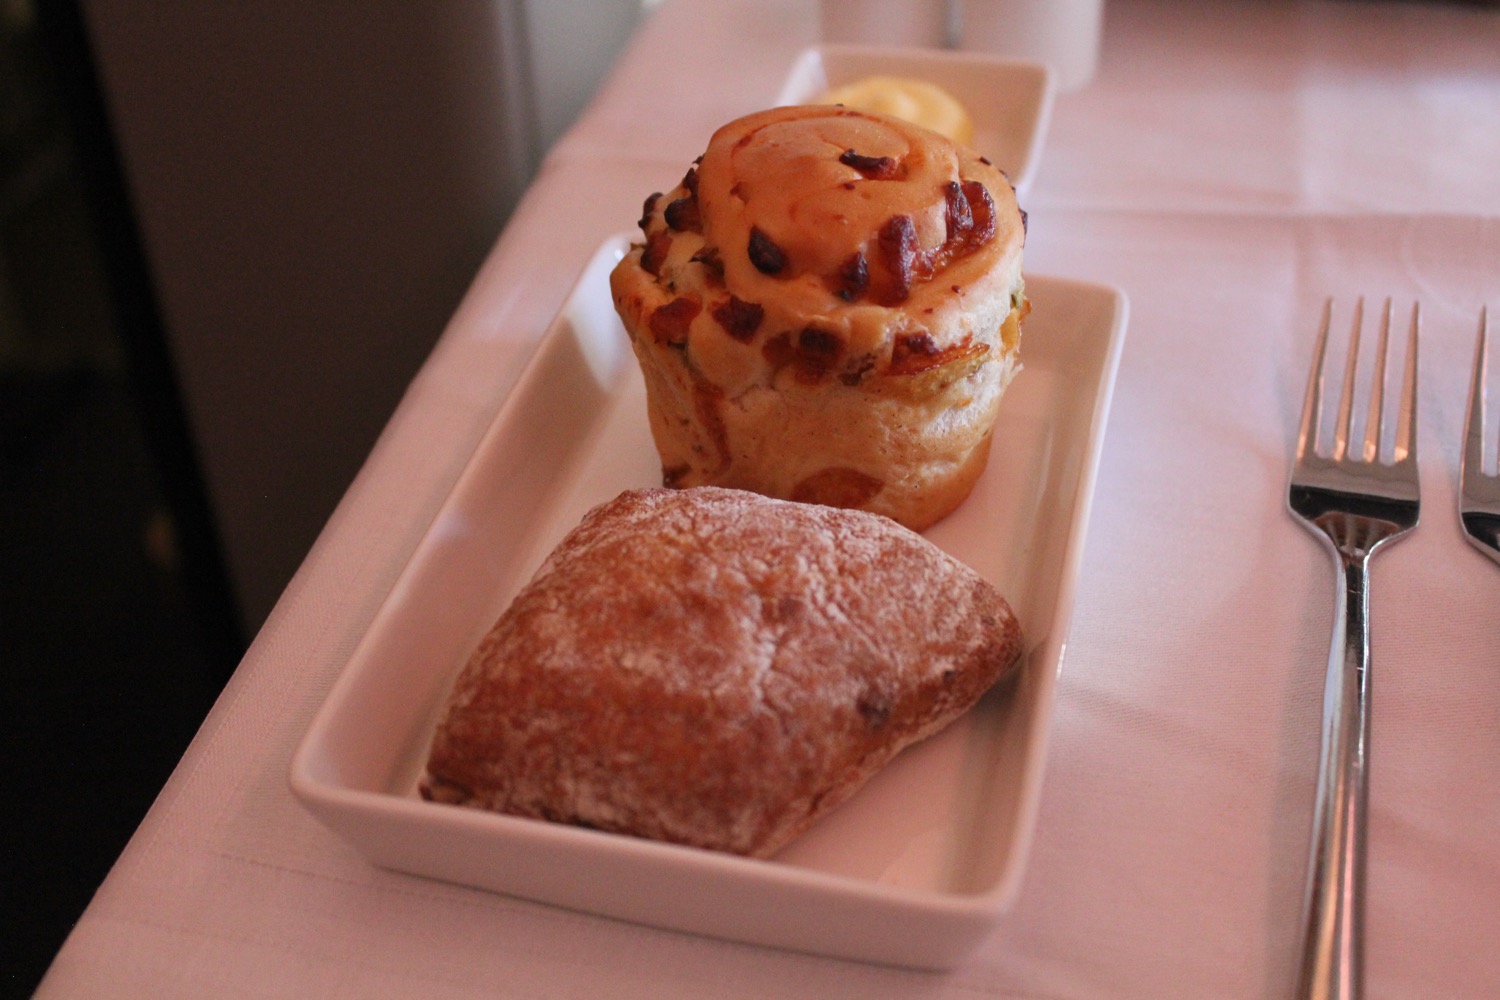 a plate of pastries on a table